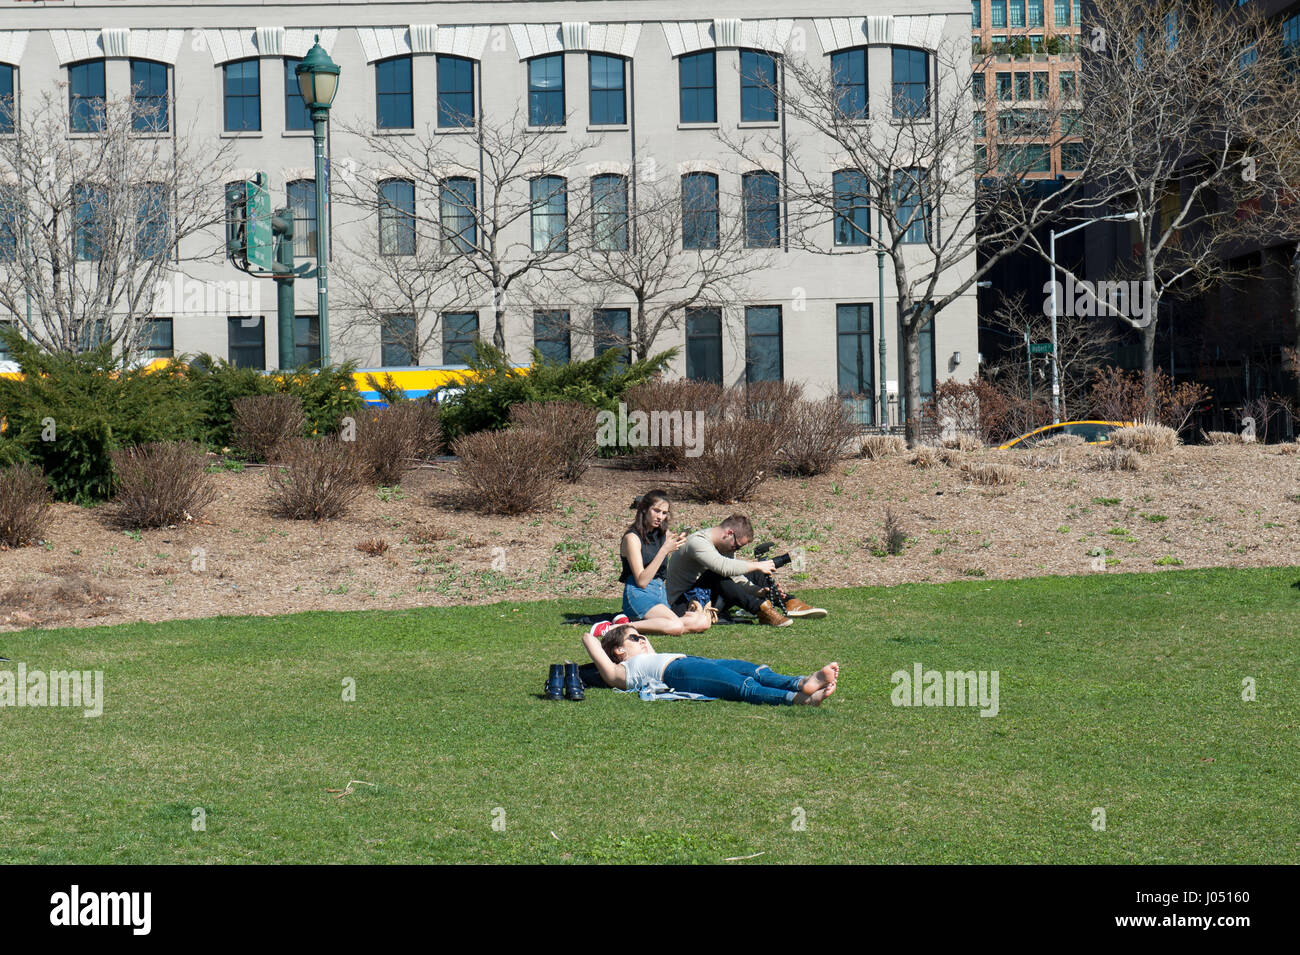 On a sunny day in early spring, people relaxed on a lawn in the Tribeca section of Hudson River Park in Manhattan, New York City. Stock Photo